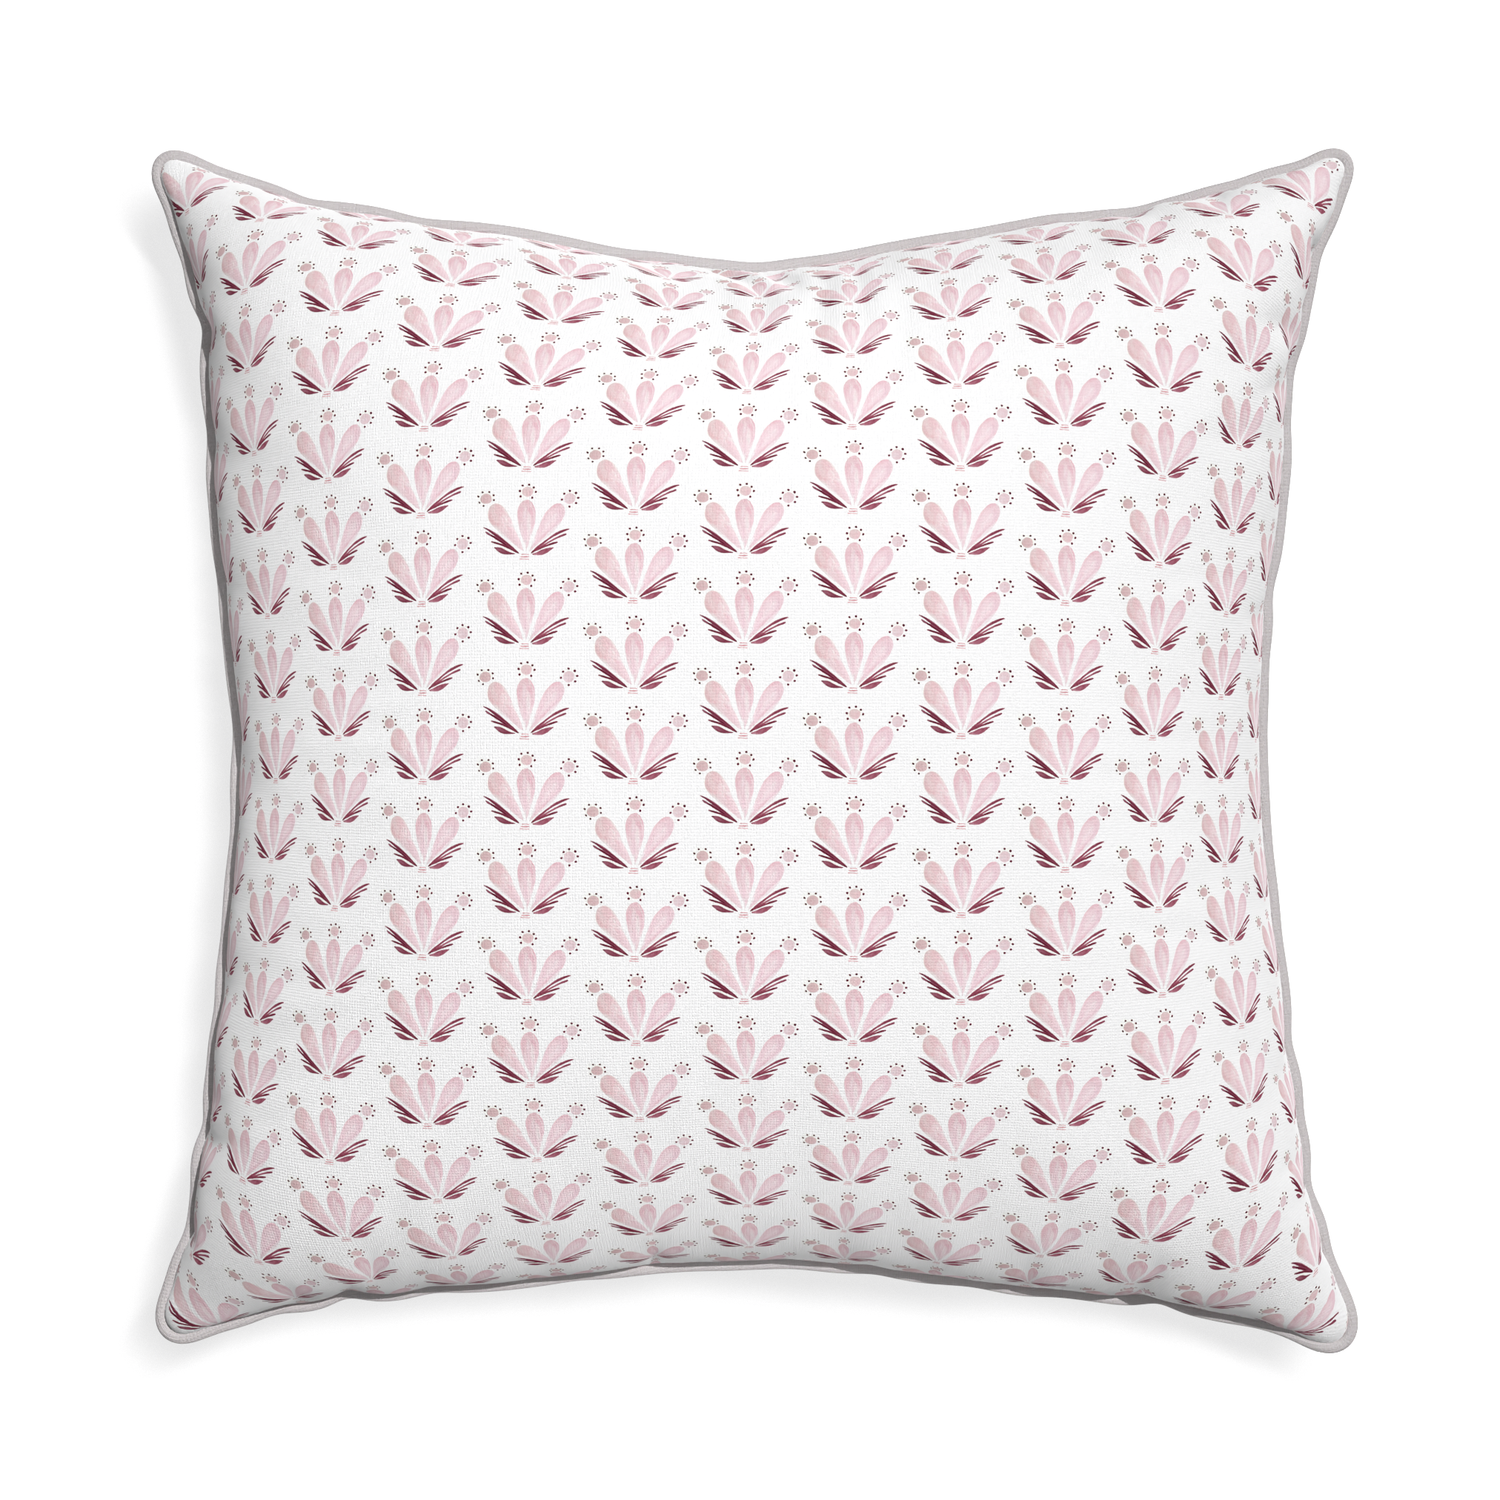 Euro-sham serena pink custom pink & burgundy drop repeat floralpillow with pebble piping on white background